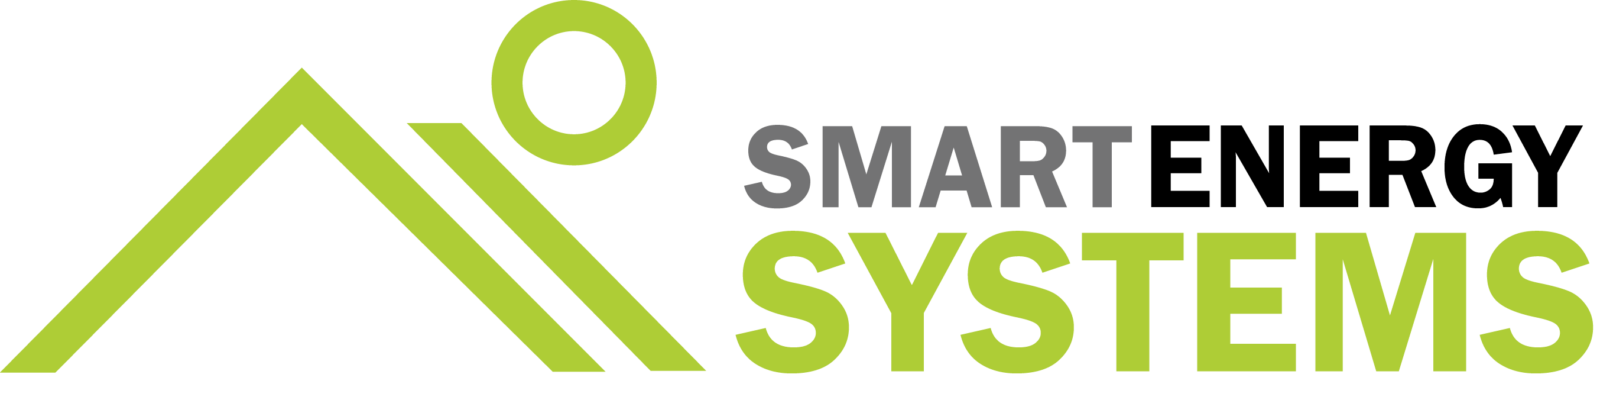 Smart Energy Systems